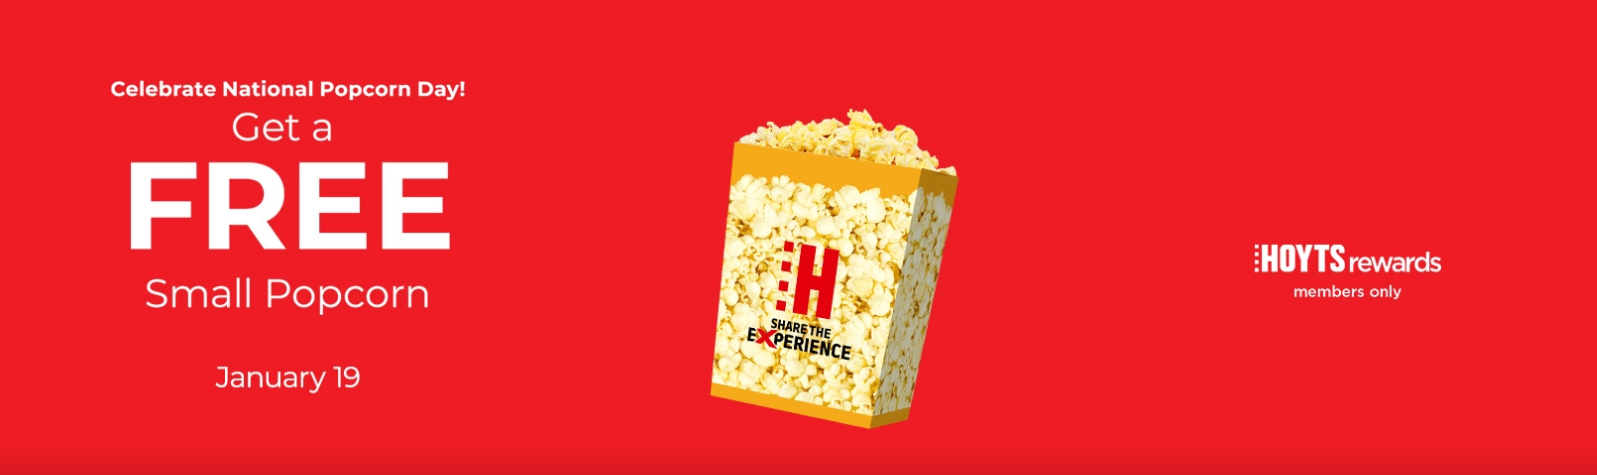 Get a FREE Small Popcorn on National Popcorn Day(19th Jan) for HOYTS Rewards Members